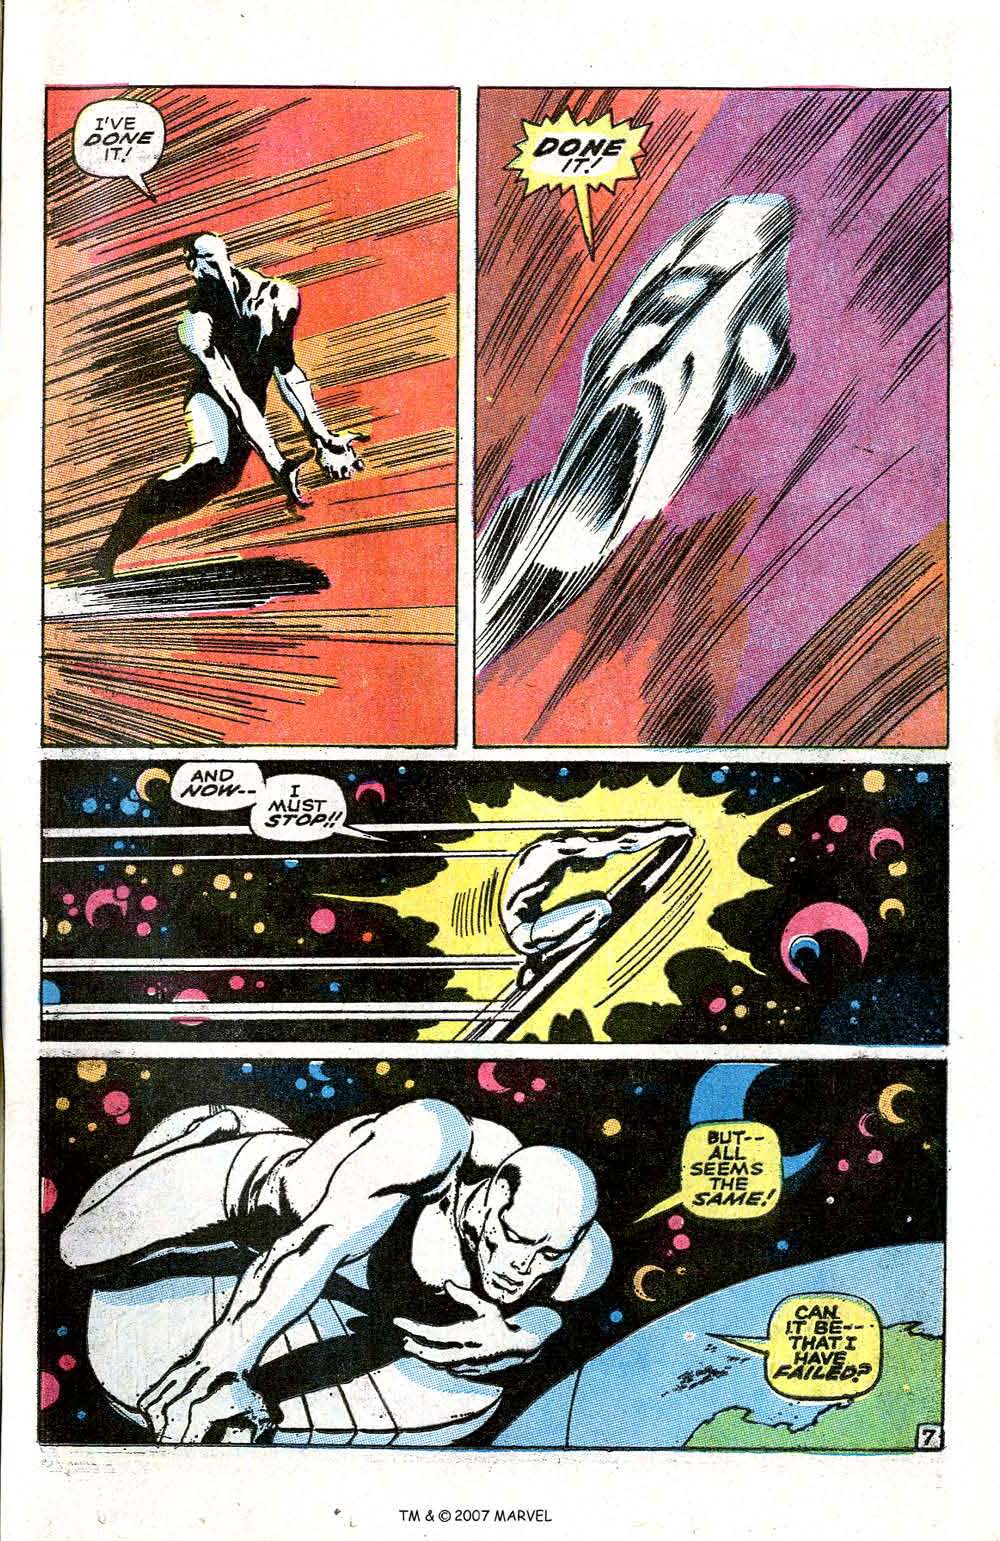 In 'Silver Surfer' (1969) #6, Silver Surfer time travels to the future in order to break Galactus' space barrier around Earth.